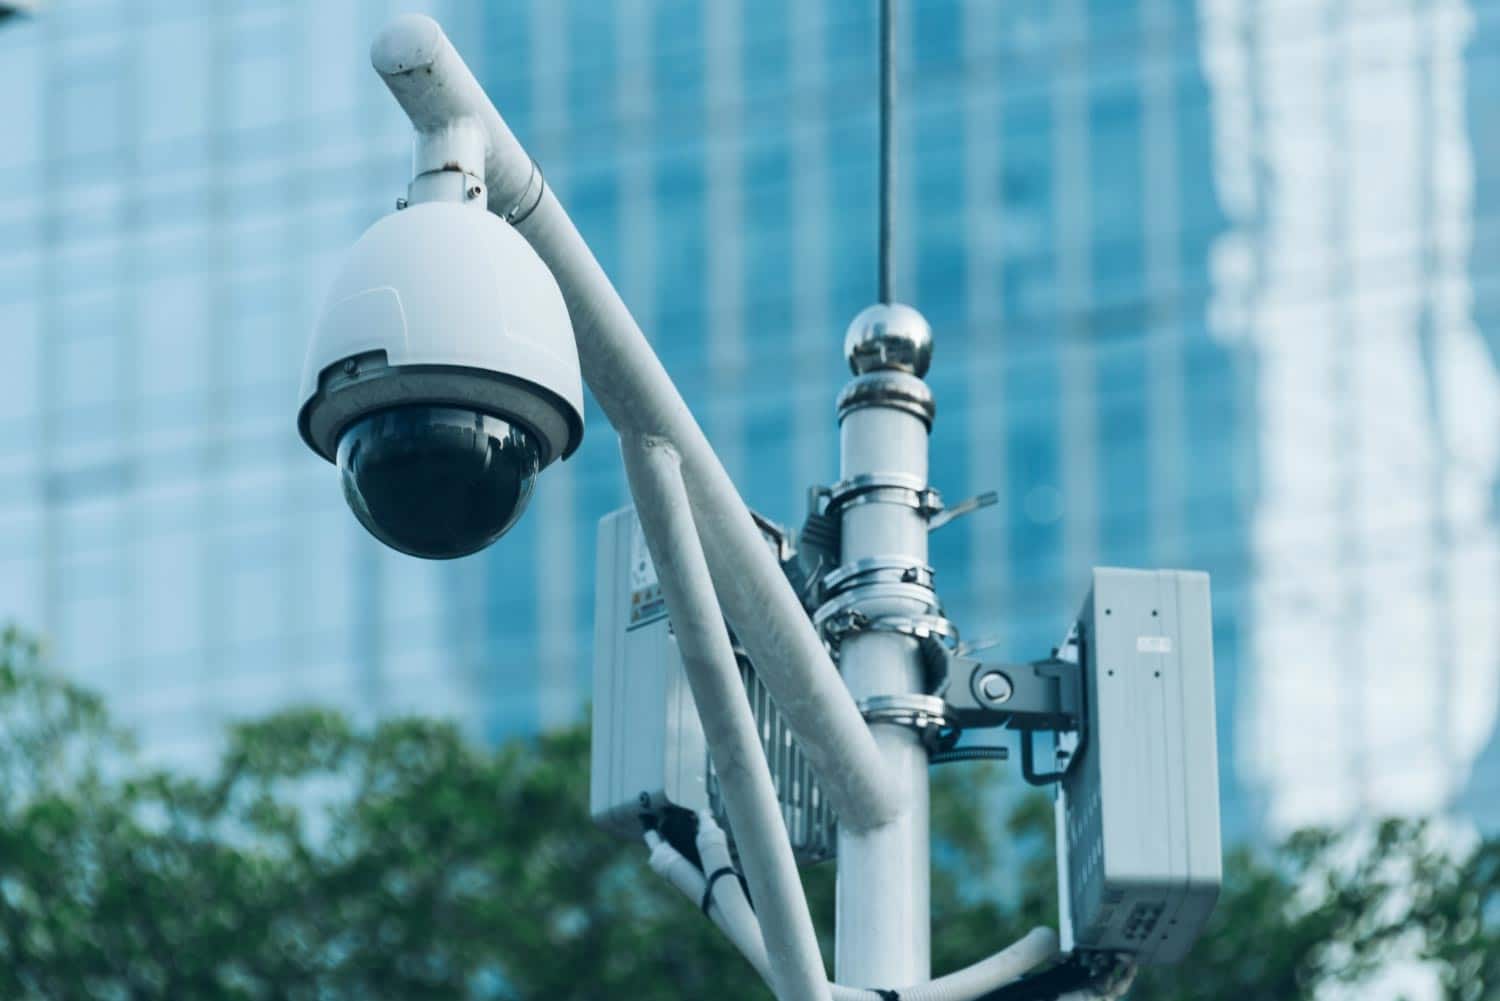 Difference Between Surveillance Cameras and Security Cameras